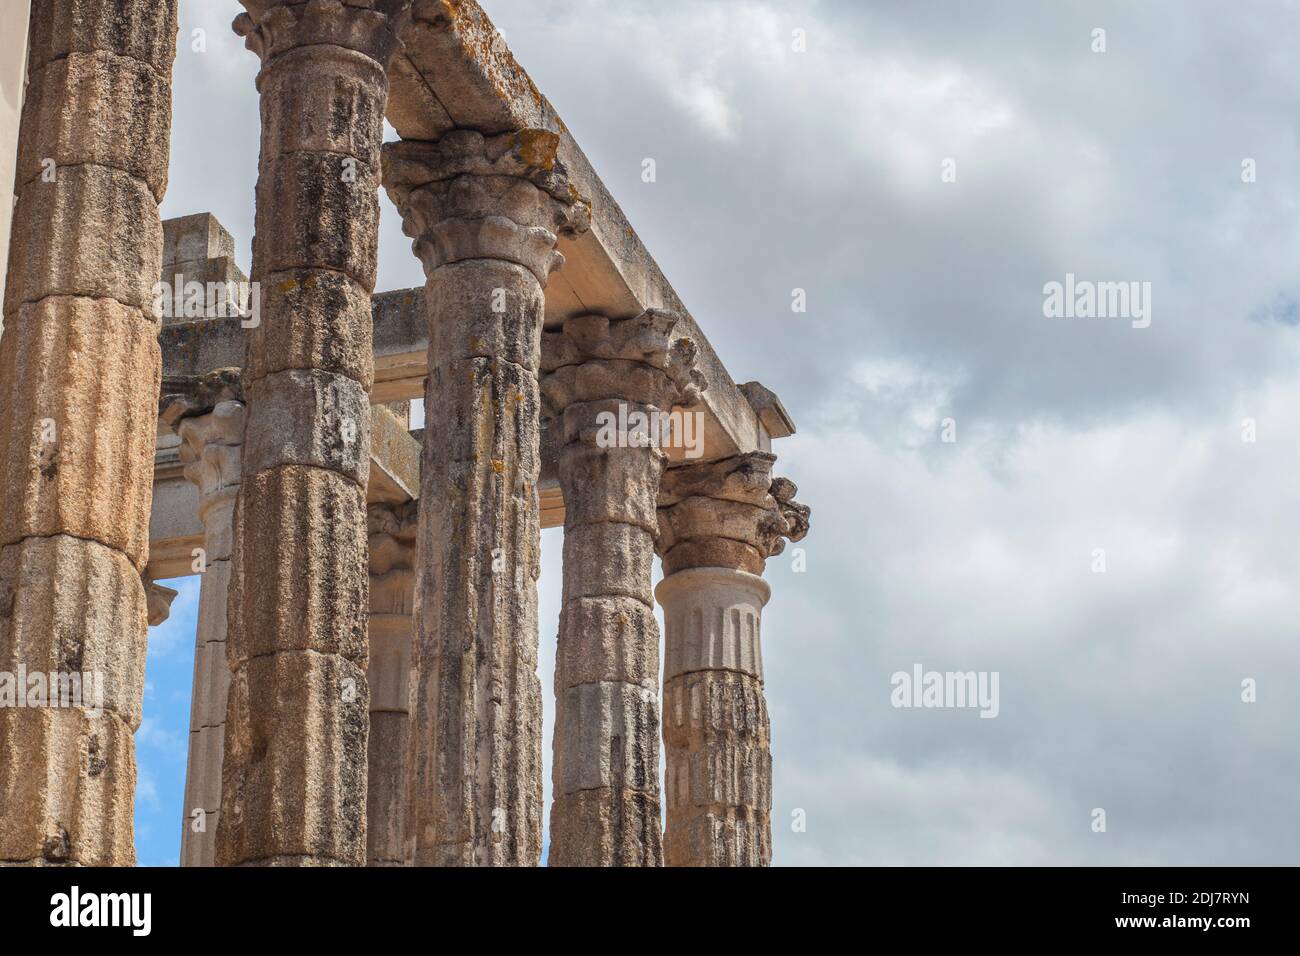 Temple of Diana. Imperial Cult Temple in Merida, Extremadura, Spain Stock Photo